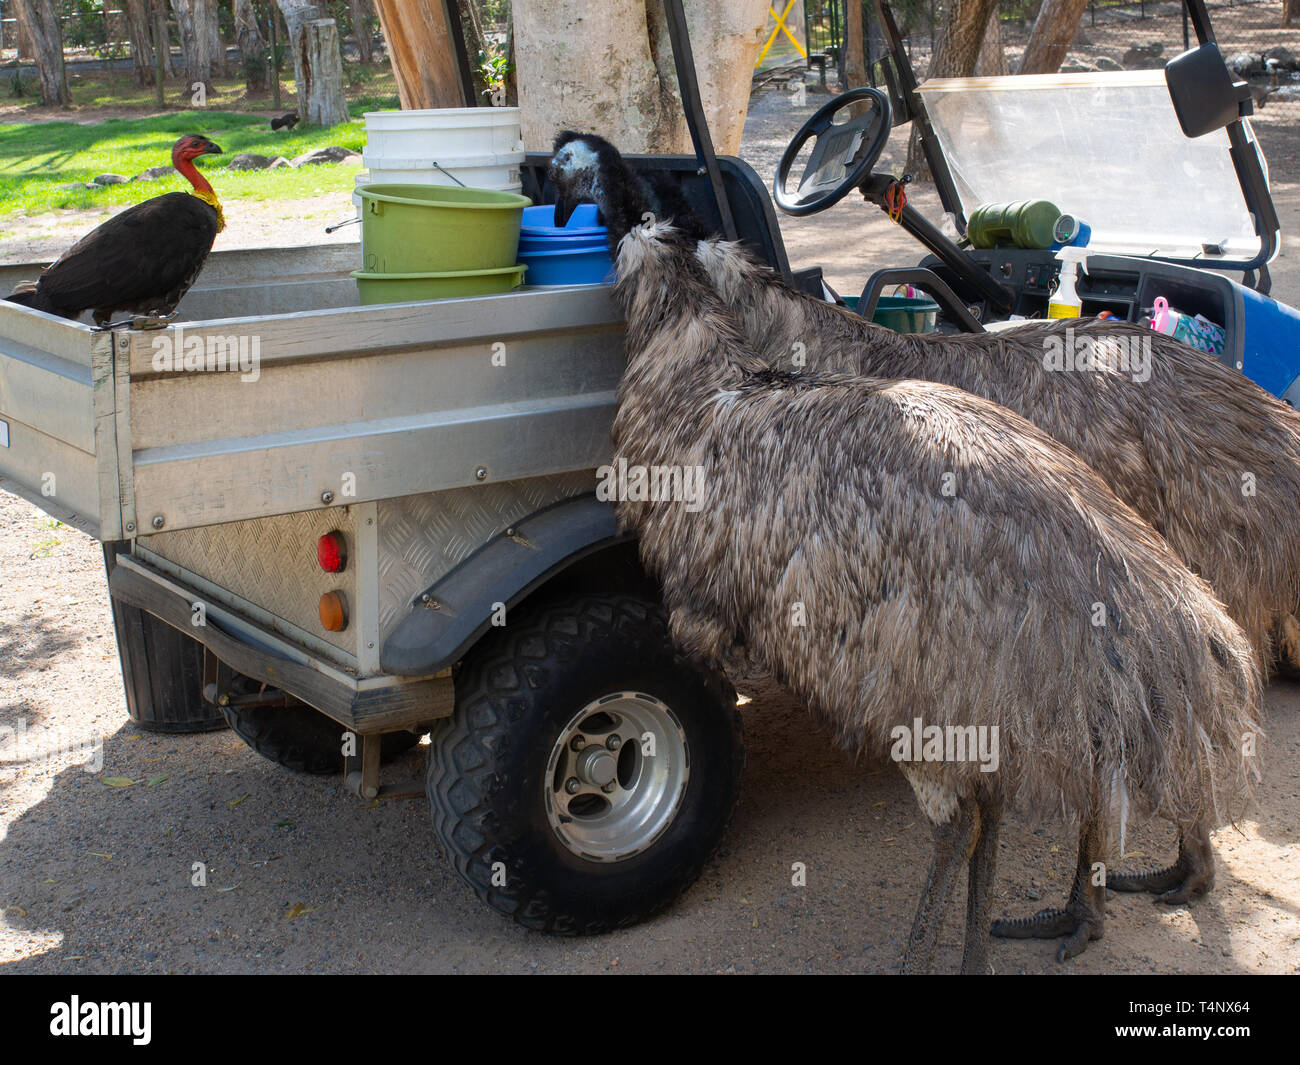 Emu Birds Eating Off The Back Of A Vehicle Stock Photo